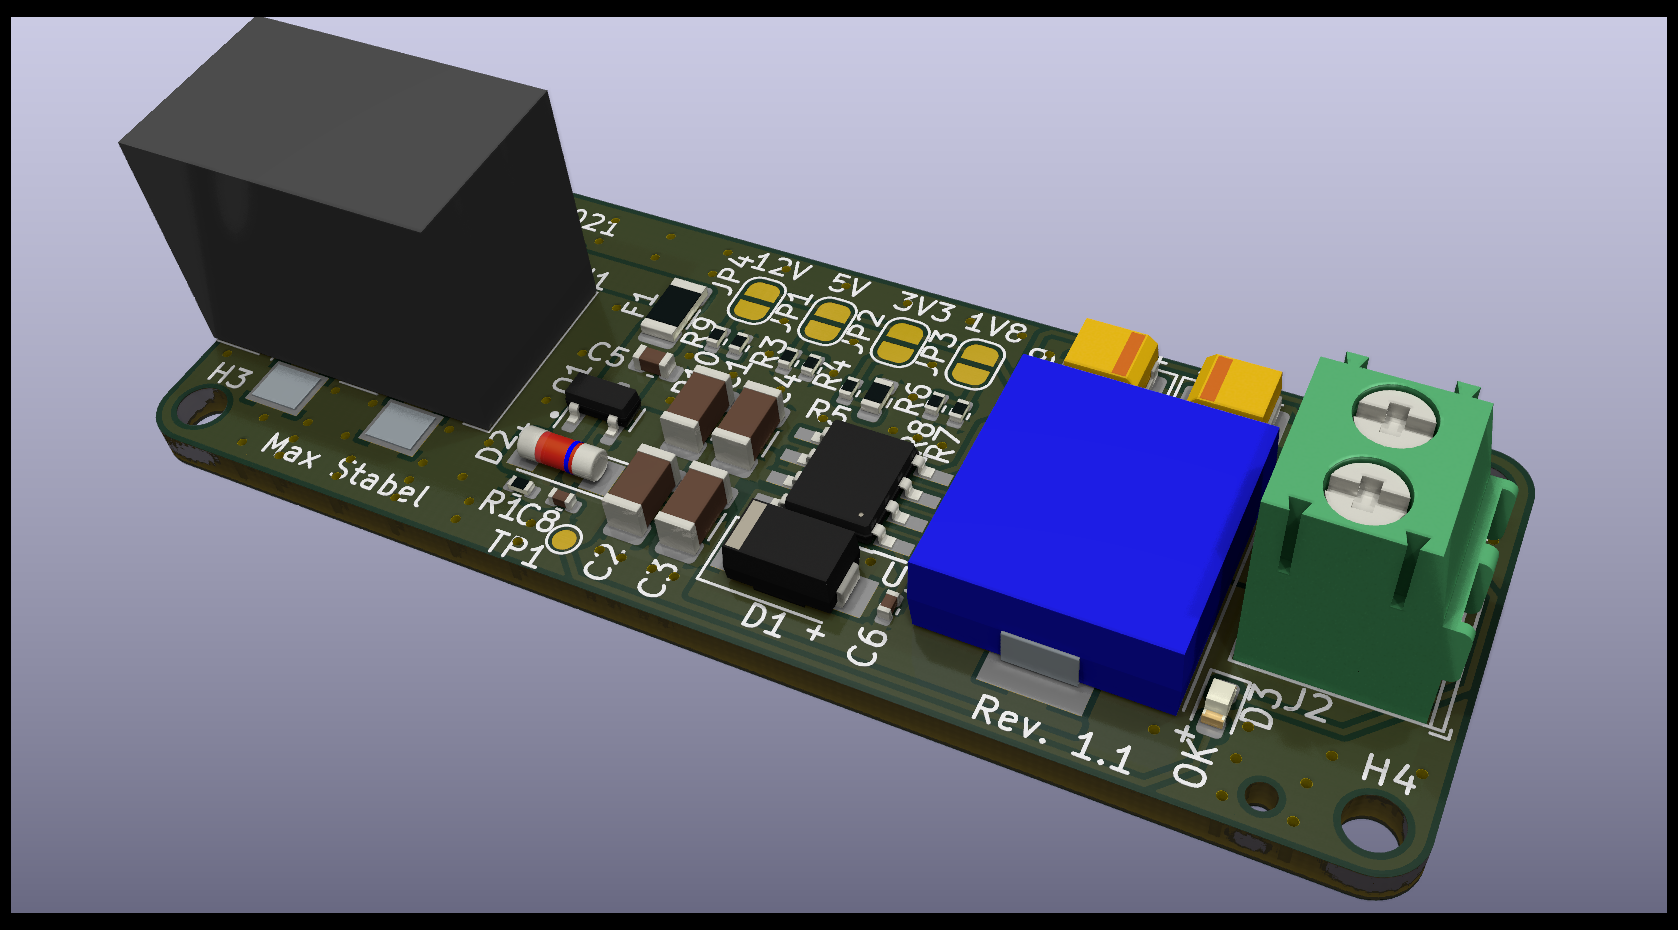 Raytrace 3D rendered image of the TPS5430 board